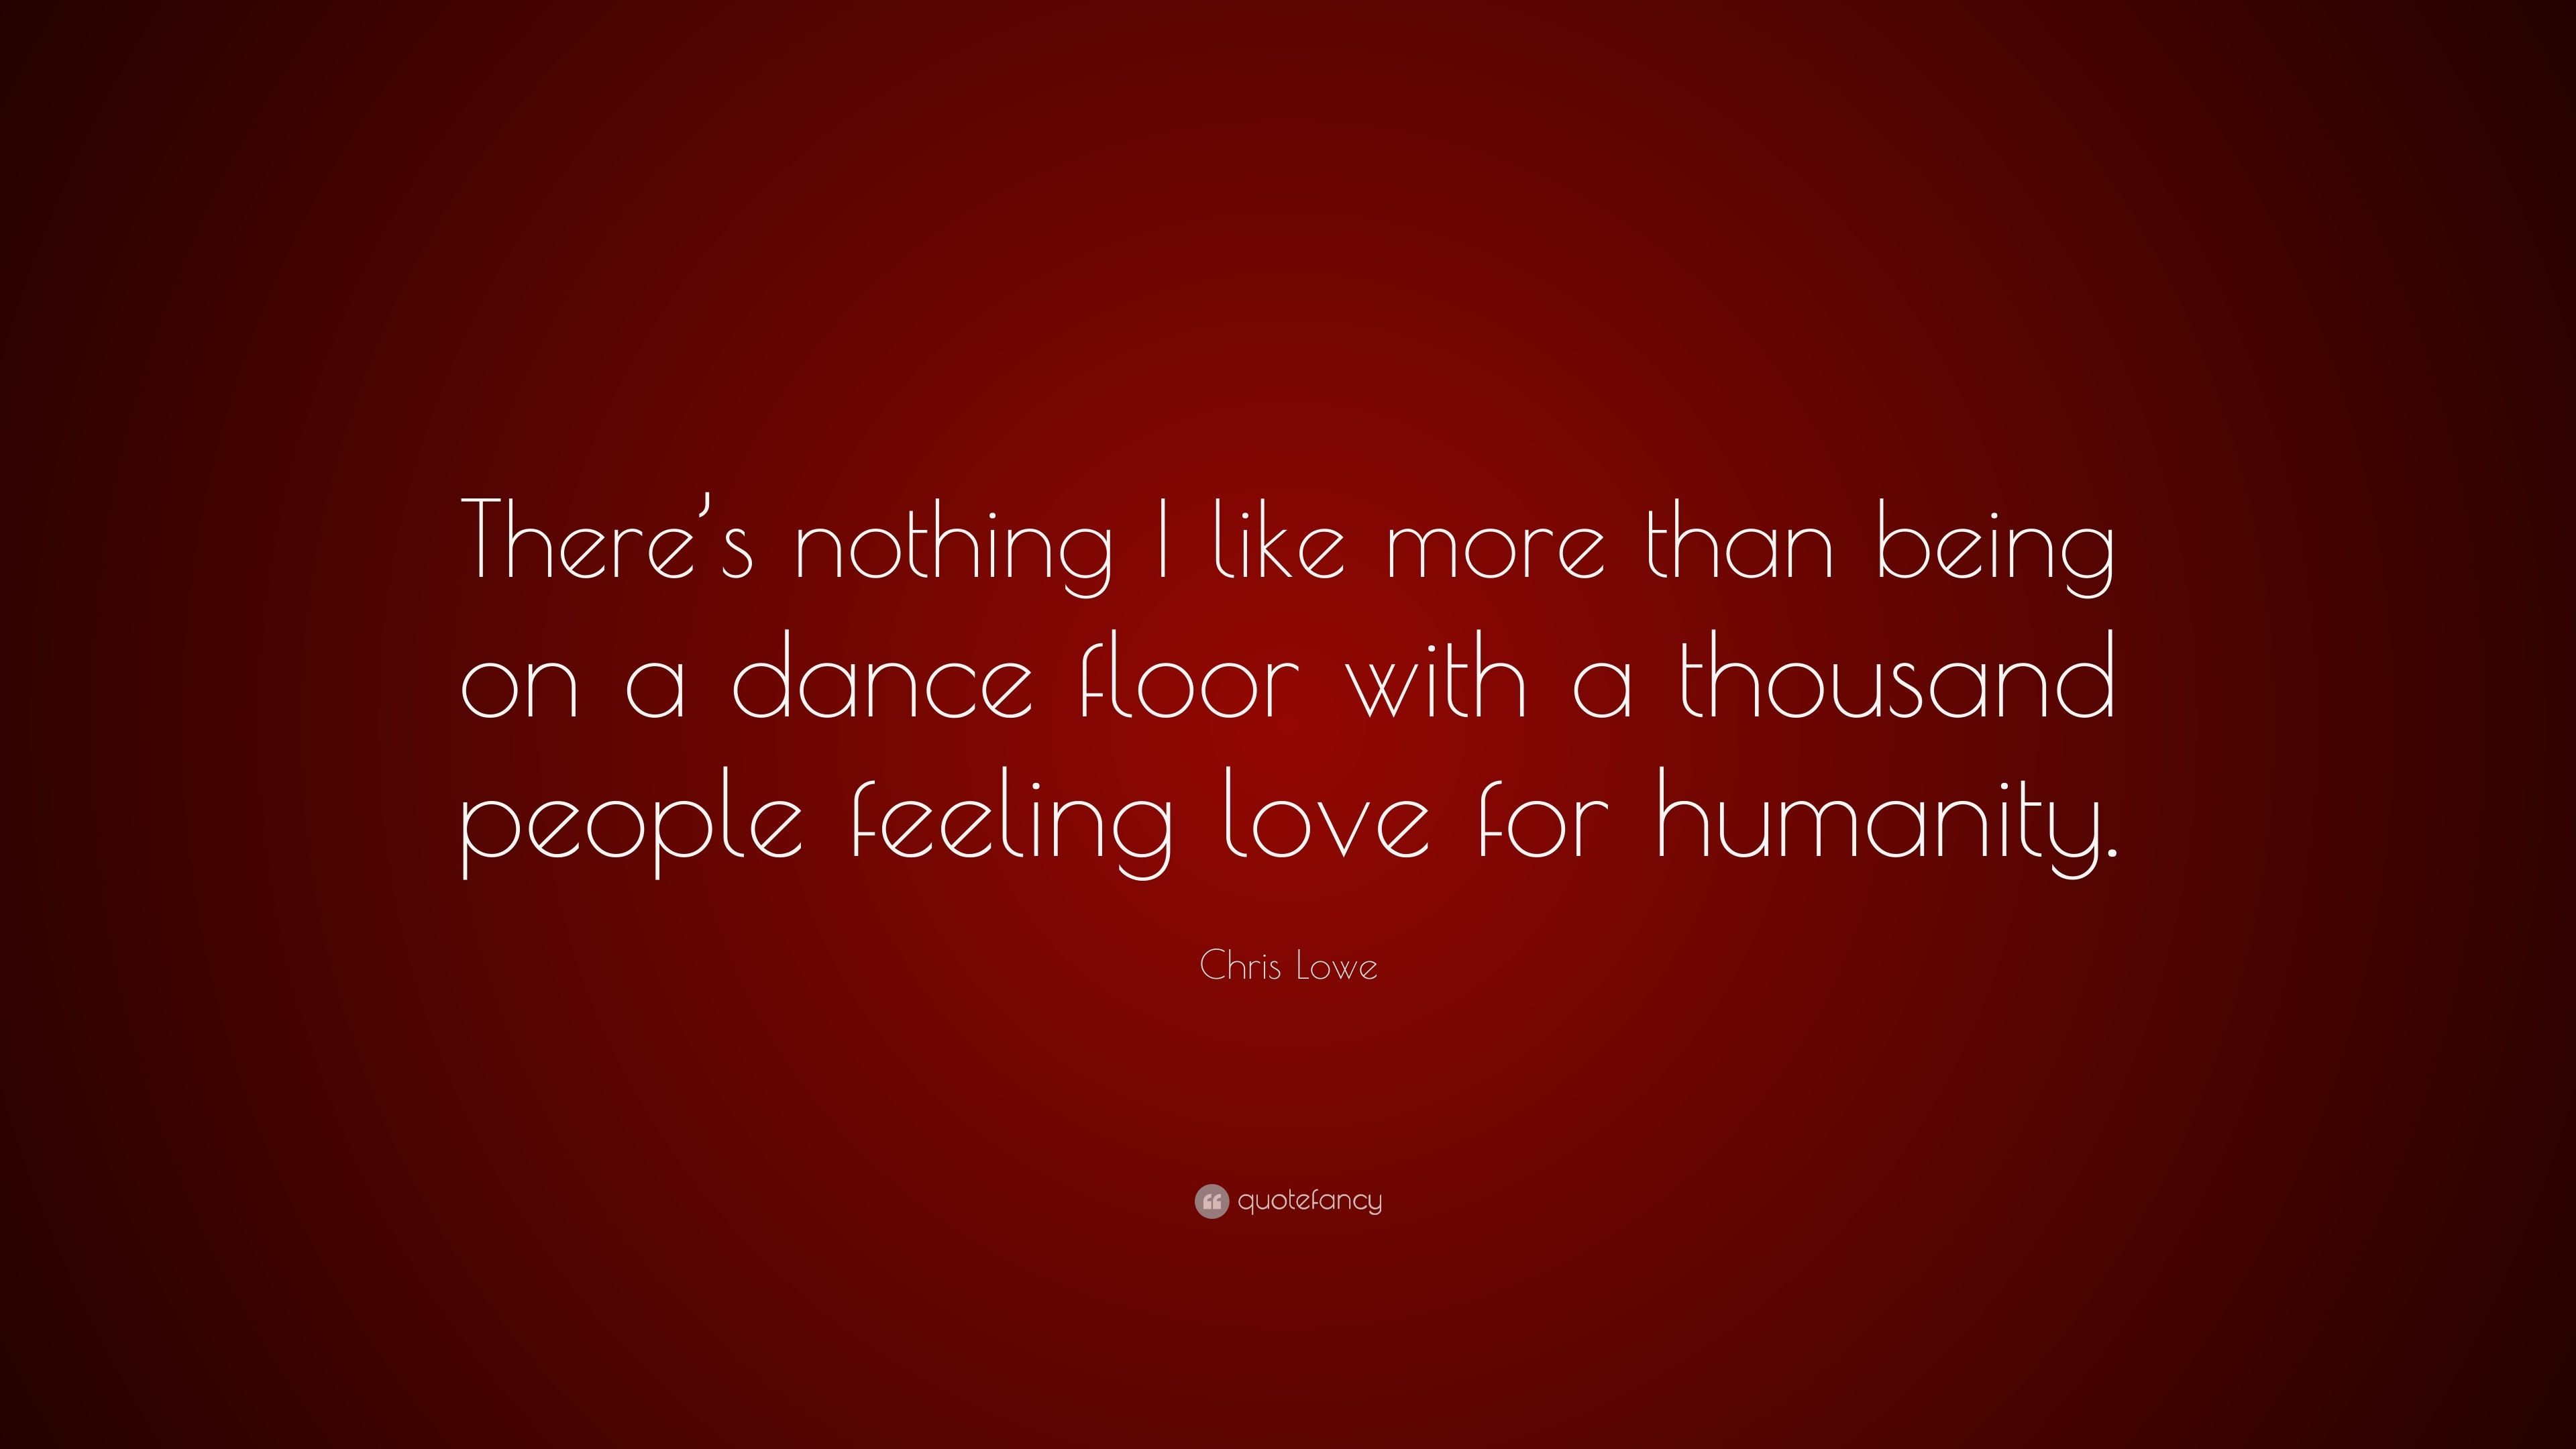 3840x2160 Chris Lowe Quote: “There's nothing I like more than being on a dance floor